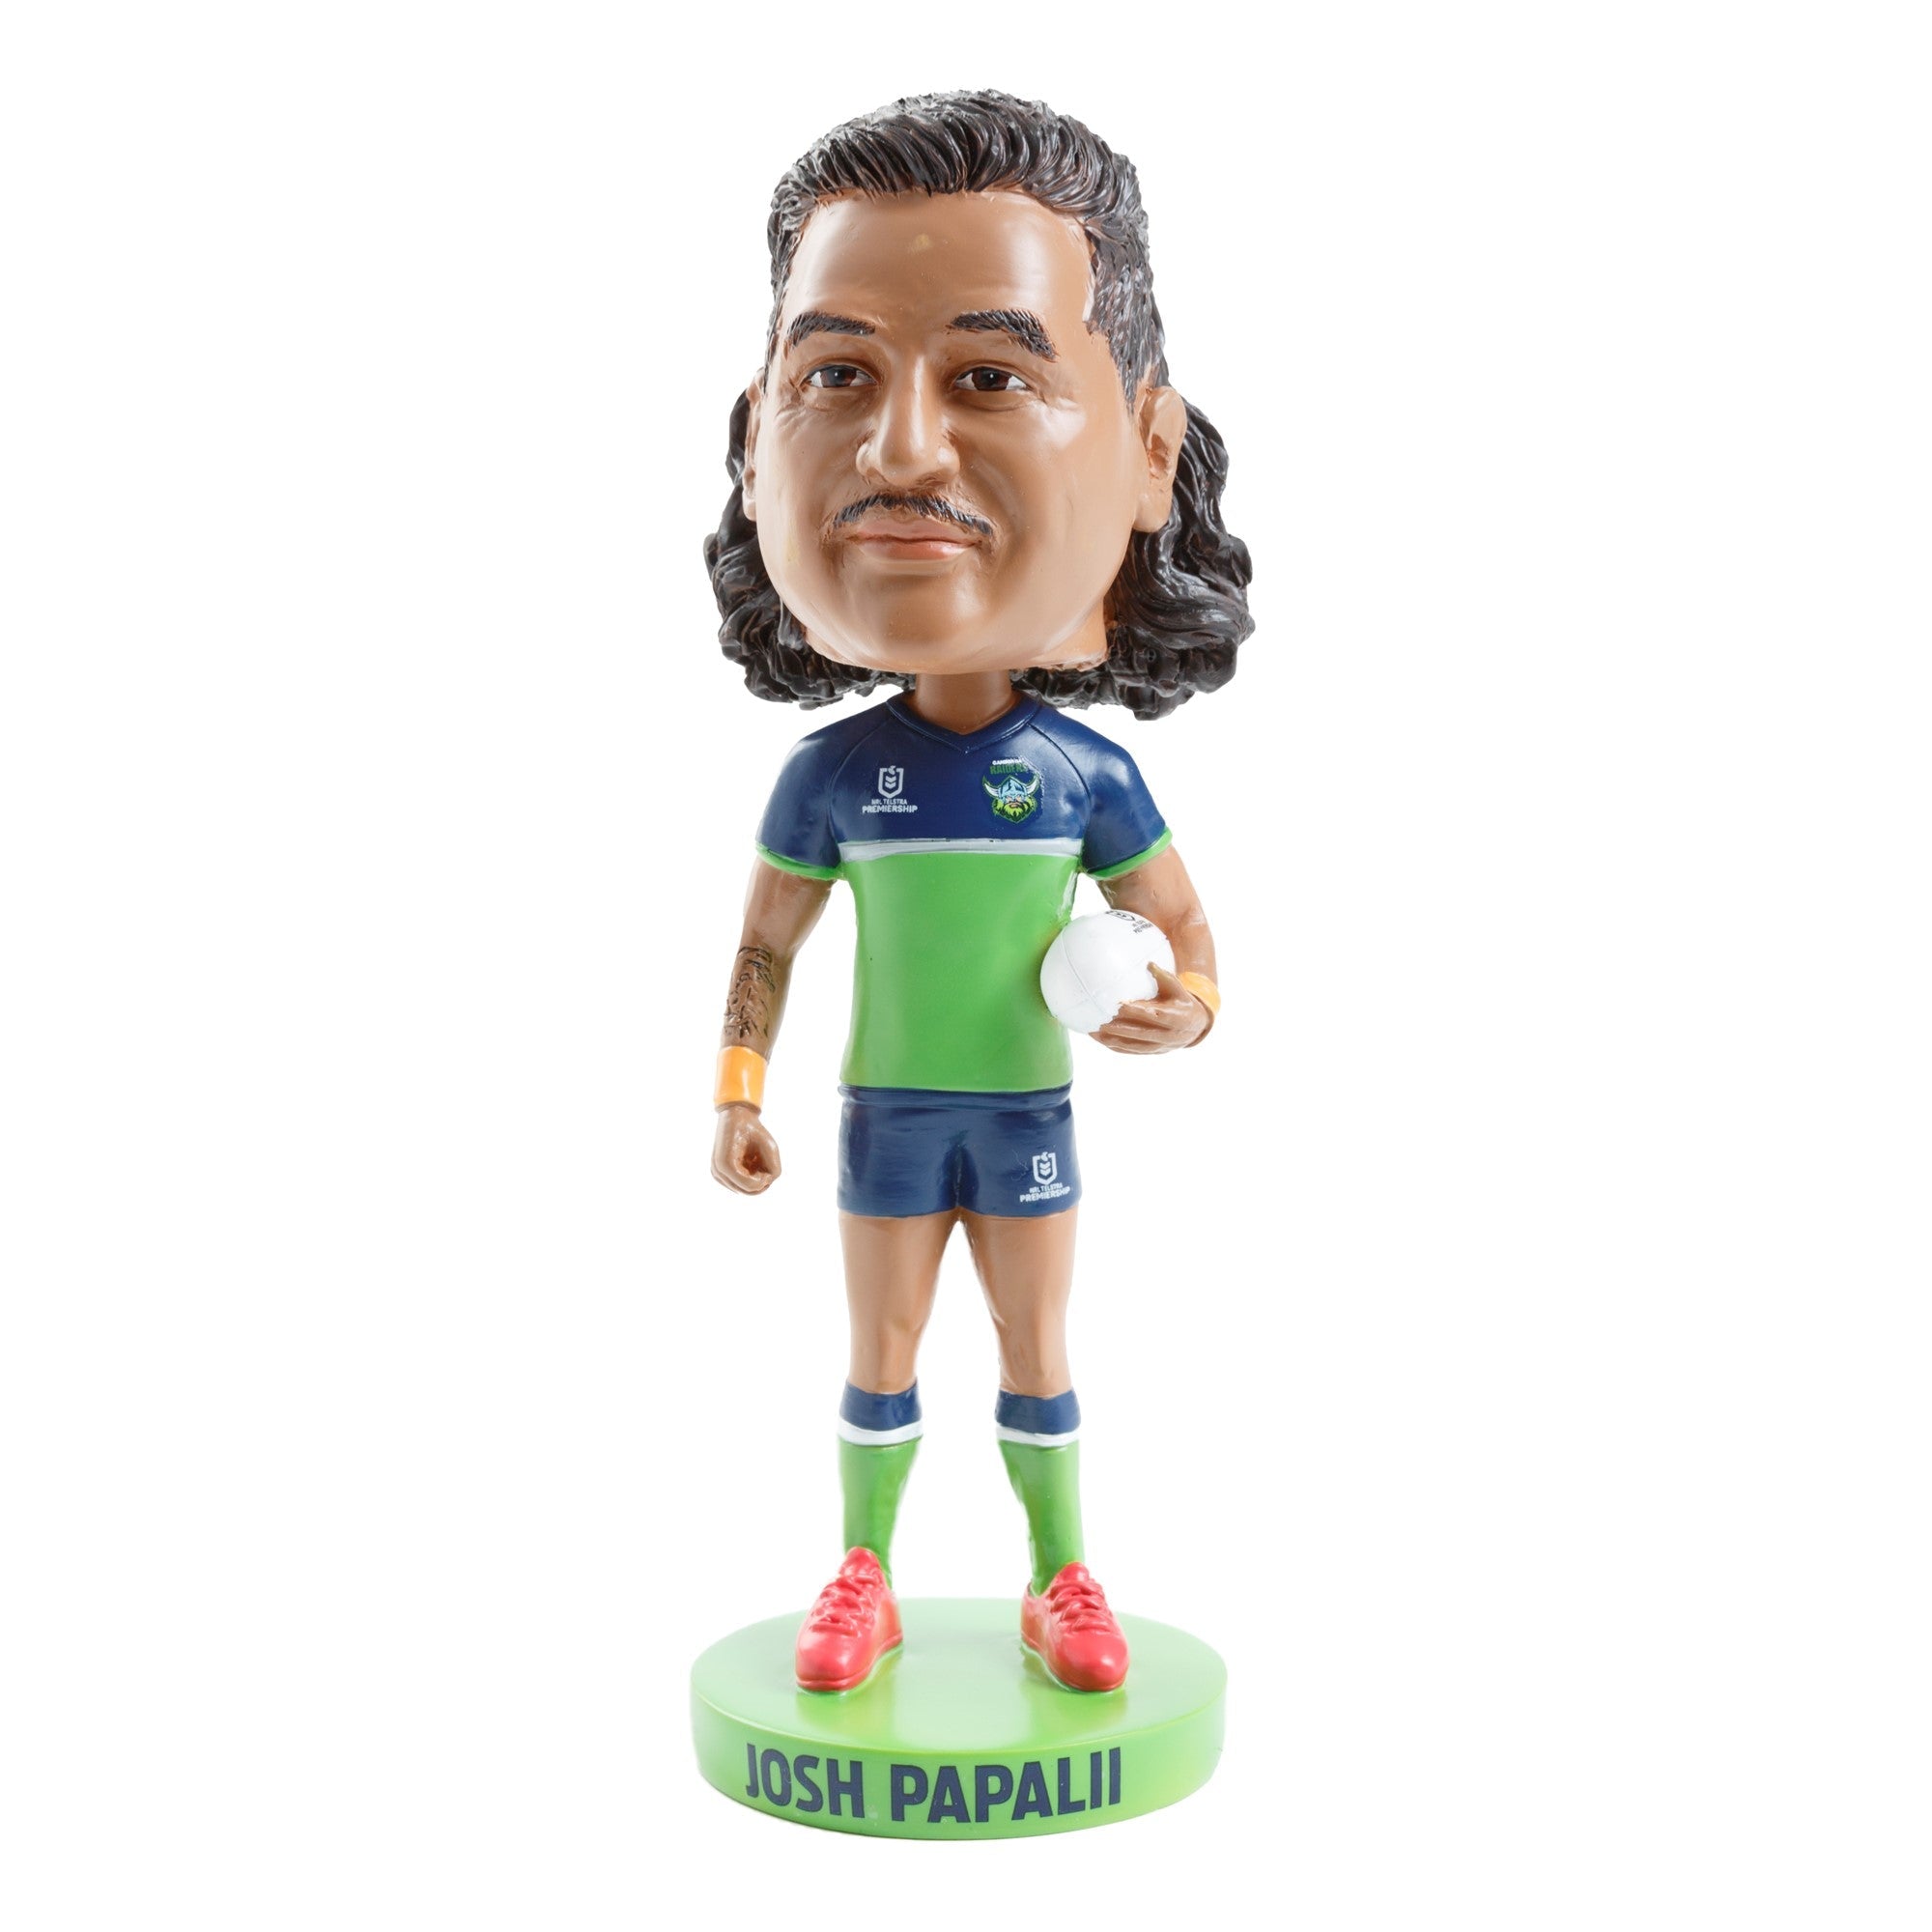 NRL Canberra Raiders JOSH PAPALII Bobblehead Collectable 18cm tall Statue Gift